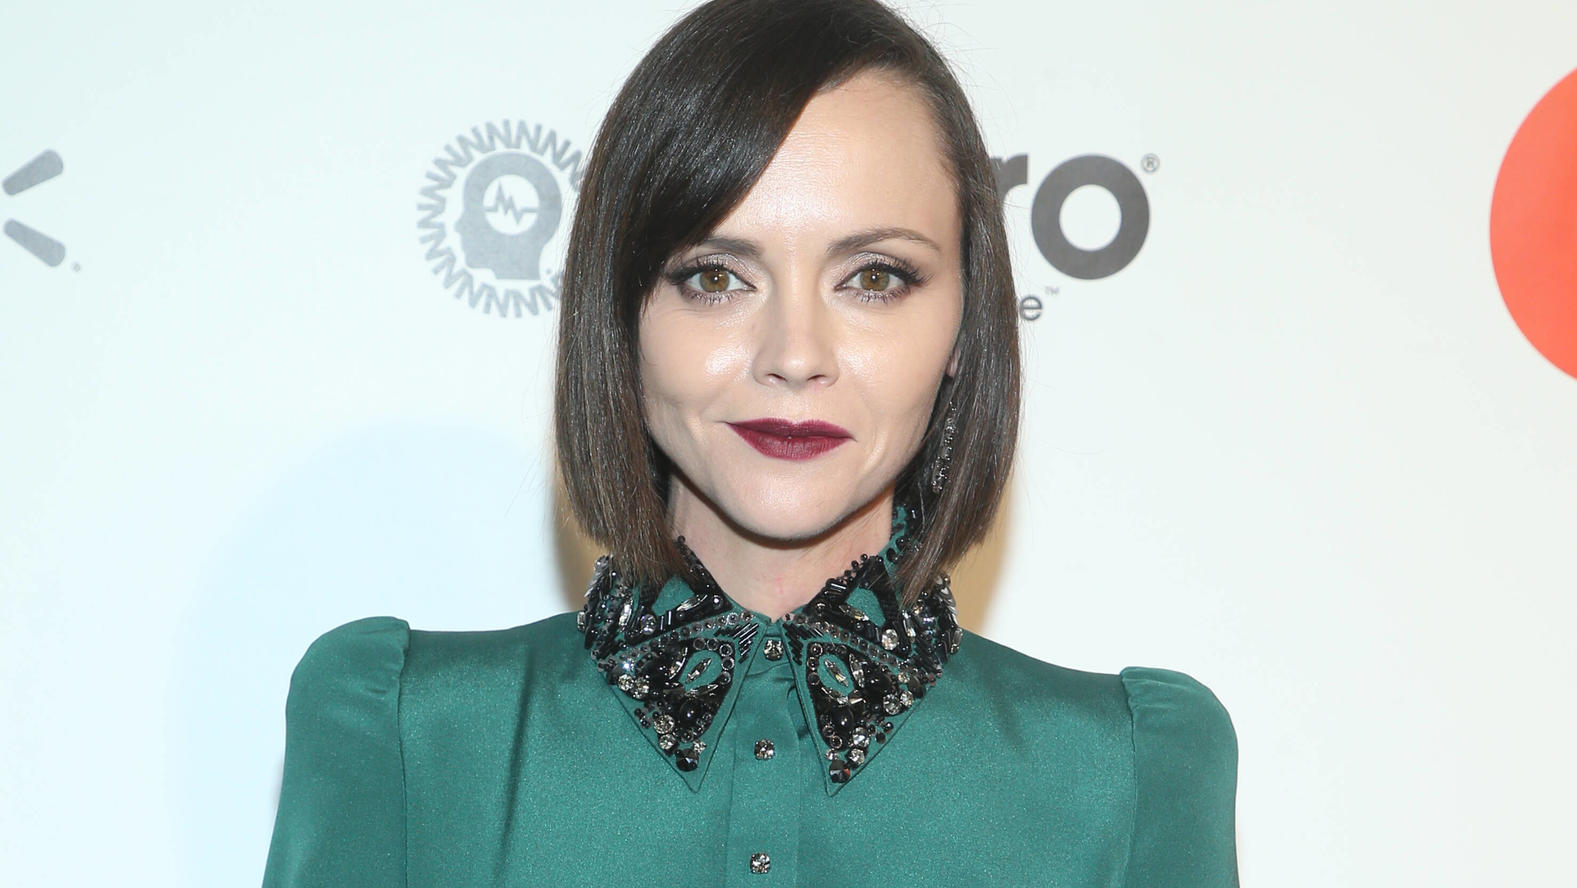 WEST HOLLYWOOD, CA - FEBRUARY 9: Christina Ricci, at the Elton John 28th Annual Academy Awards Viewing Party at West Hollywood Park in California on February 9, 2020. PUBLICATIONxINxGERxSUIxAUTxONLY Copyright: xFayexSadoux